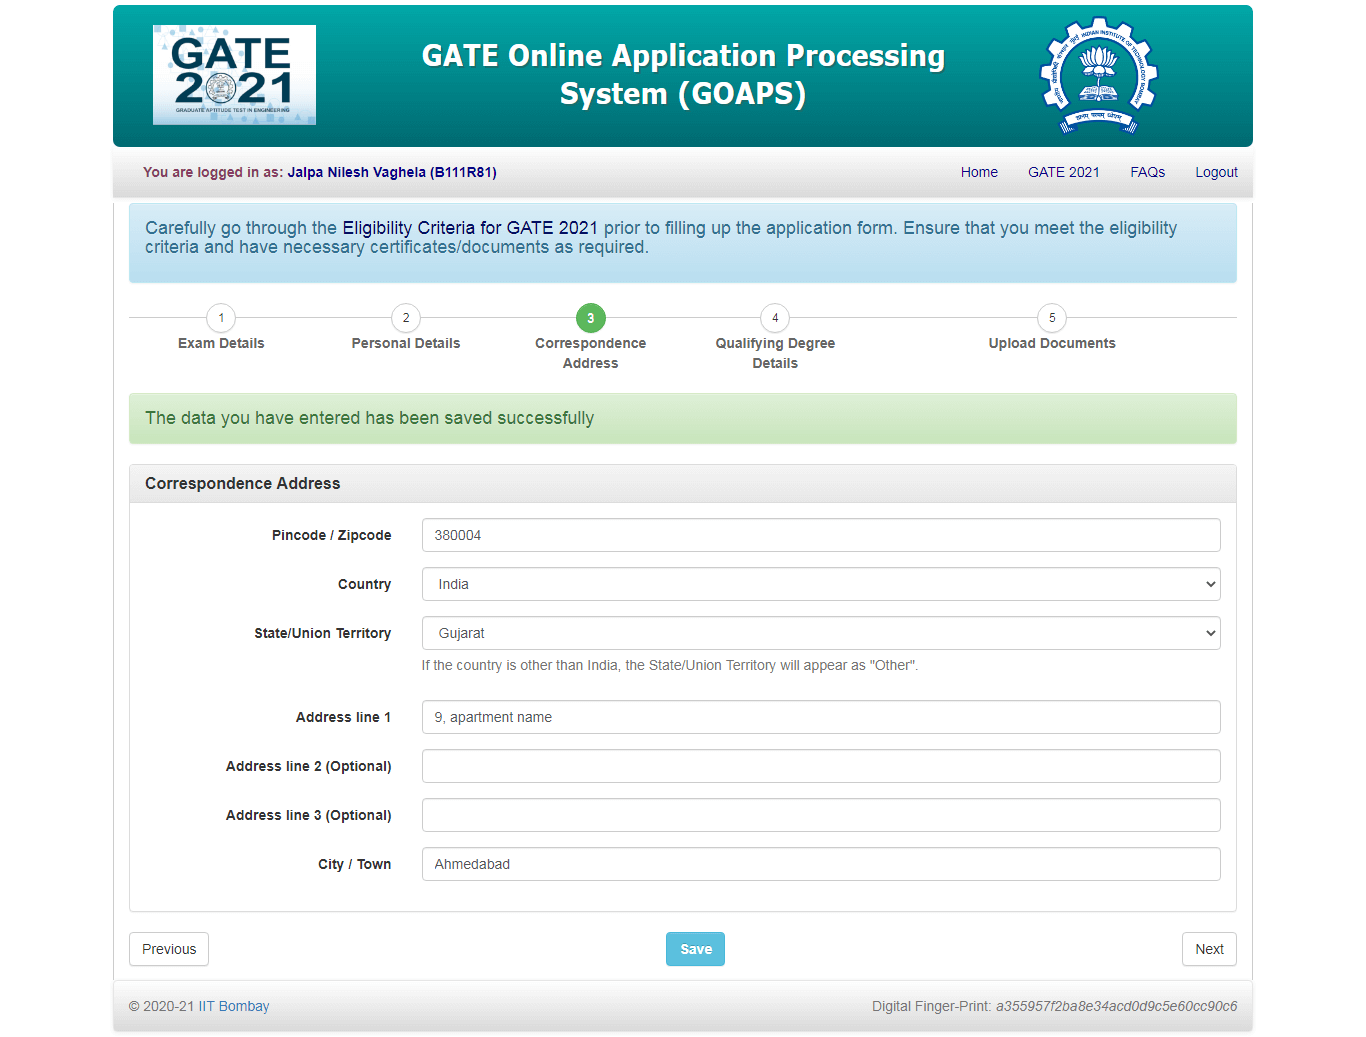 GATE Online application Processing system Step 3